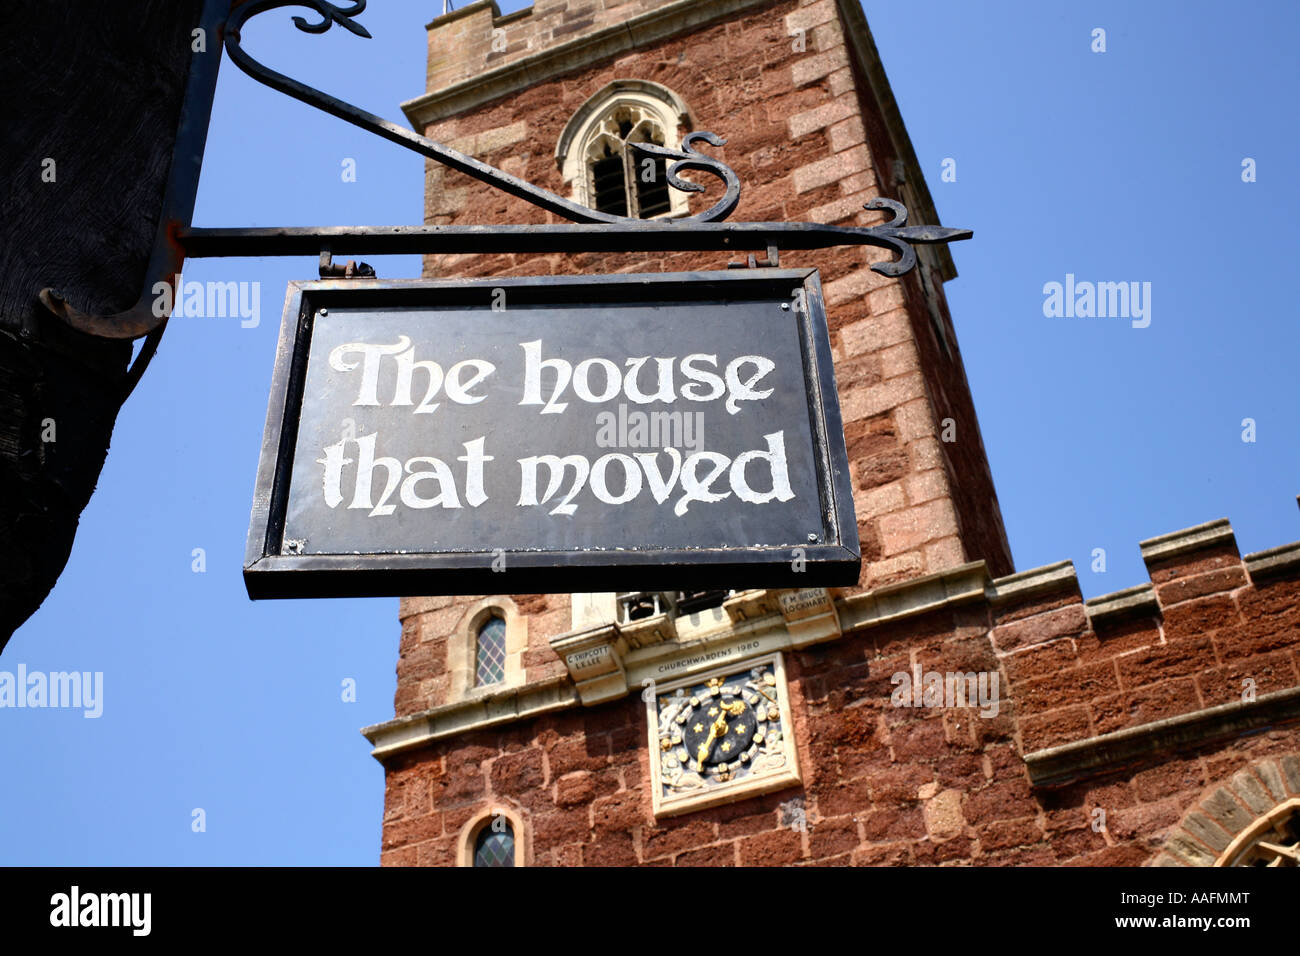 The House that Moved, Exeter, Devon, England Stock Photo